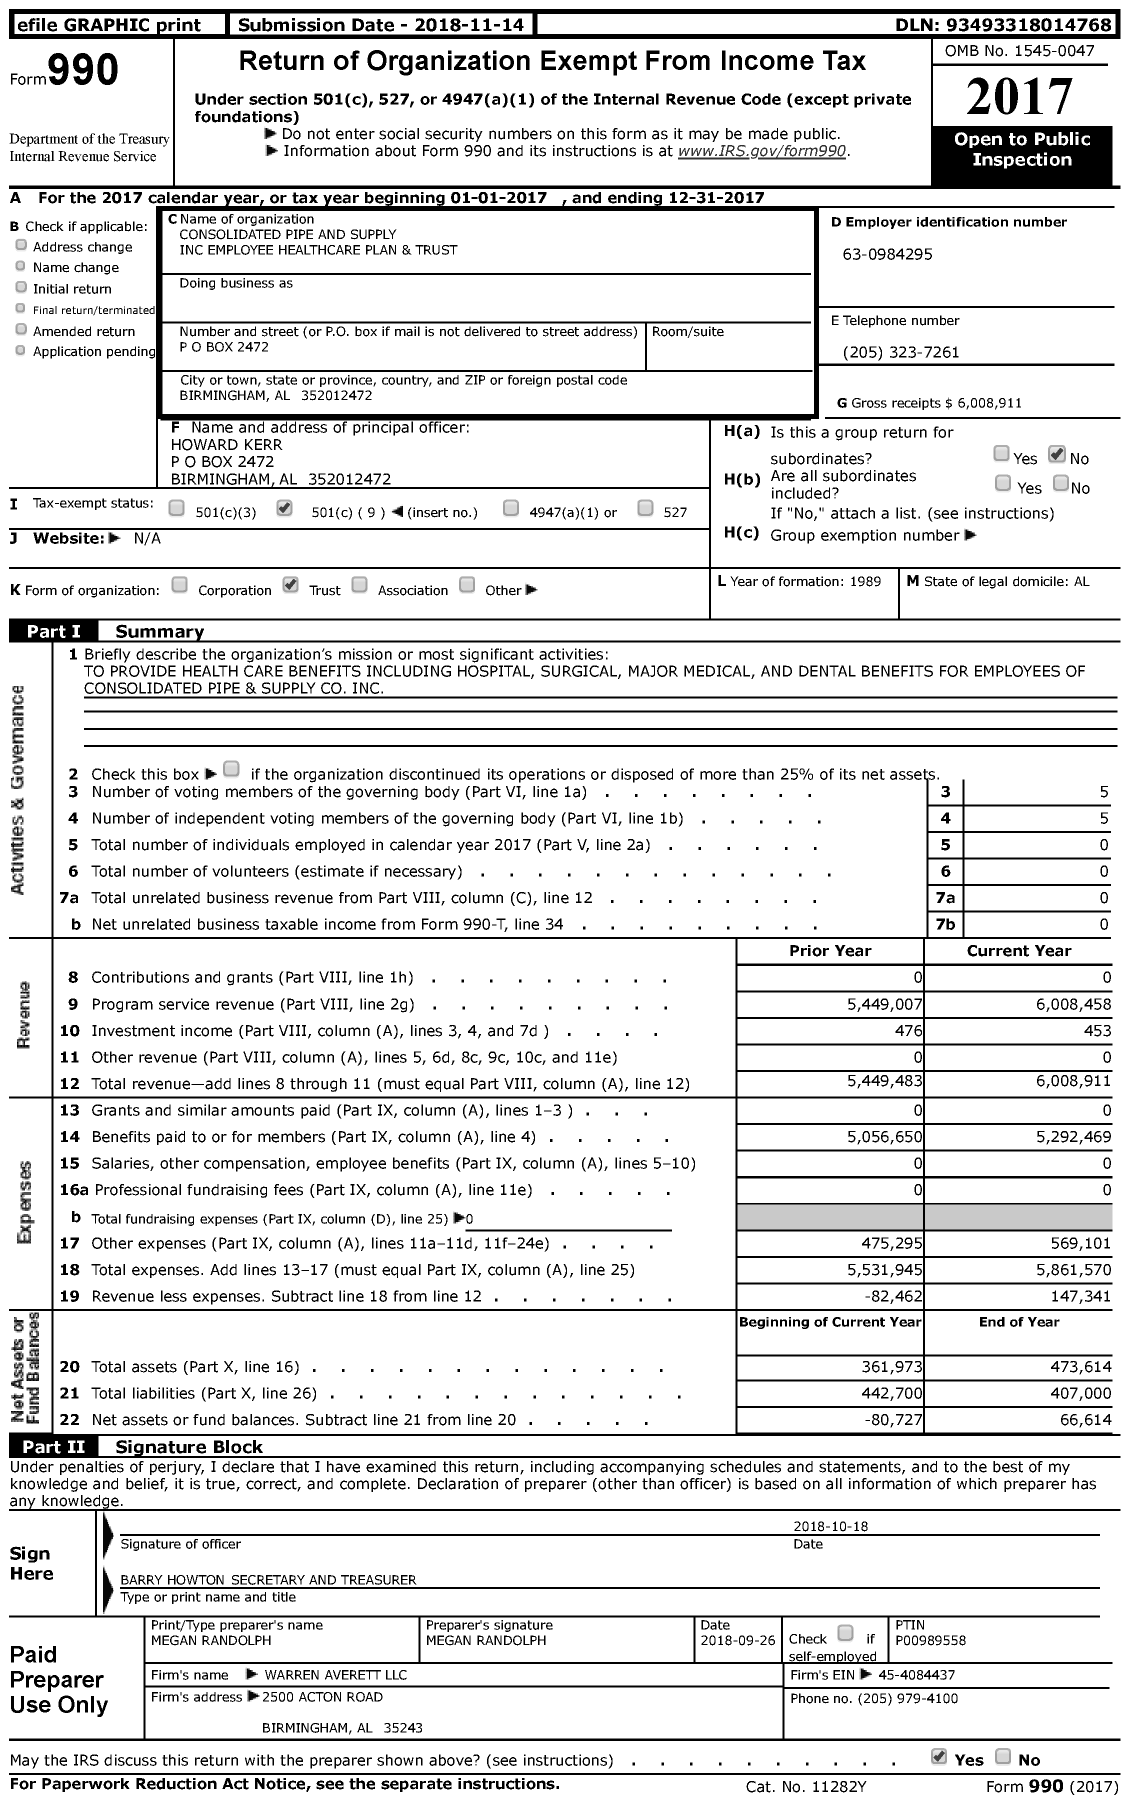 Image of first page of 2017 Form 990 for CONSOLIDATED PIPE AND SUPPLY employee healthCARE plan AND trust